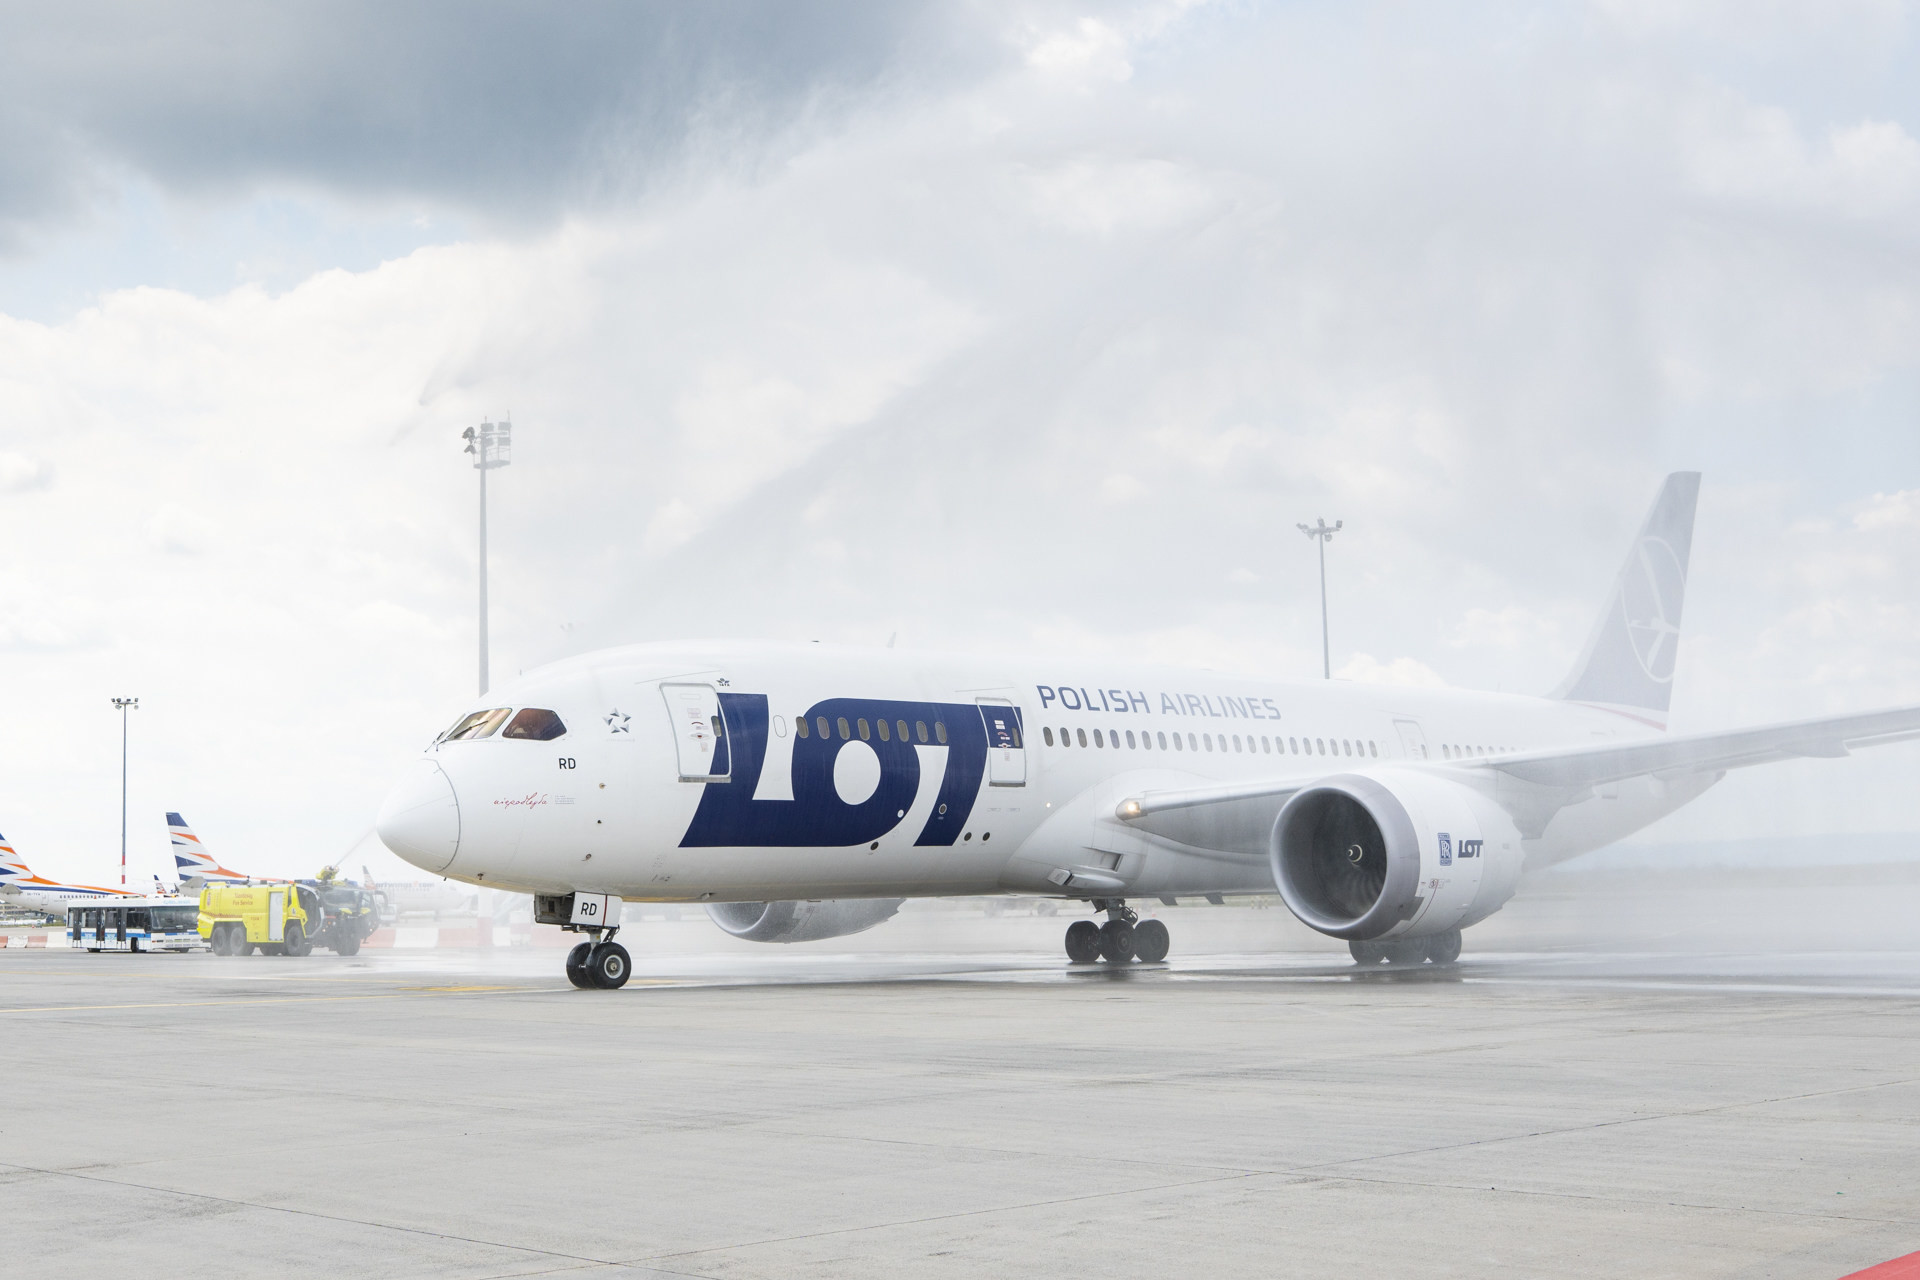 LOT Polish Airlines’ Budapest-Seoul non-stop flight re-launched (Photo Budapest AirportBaranyi Róbert)